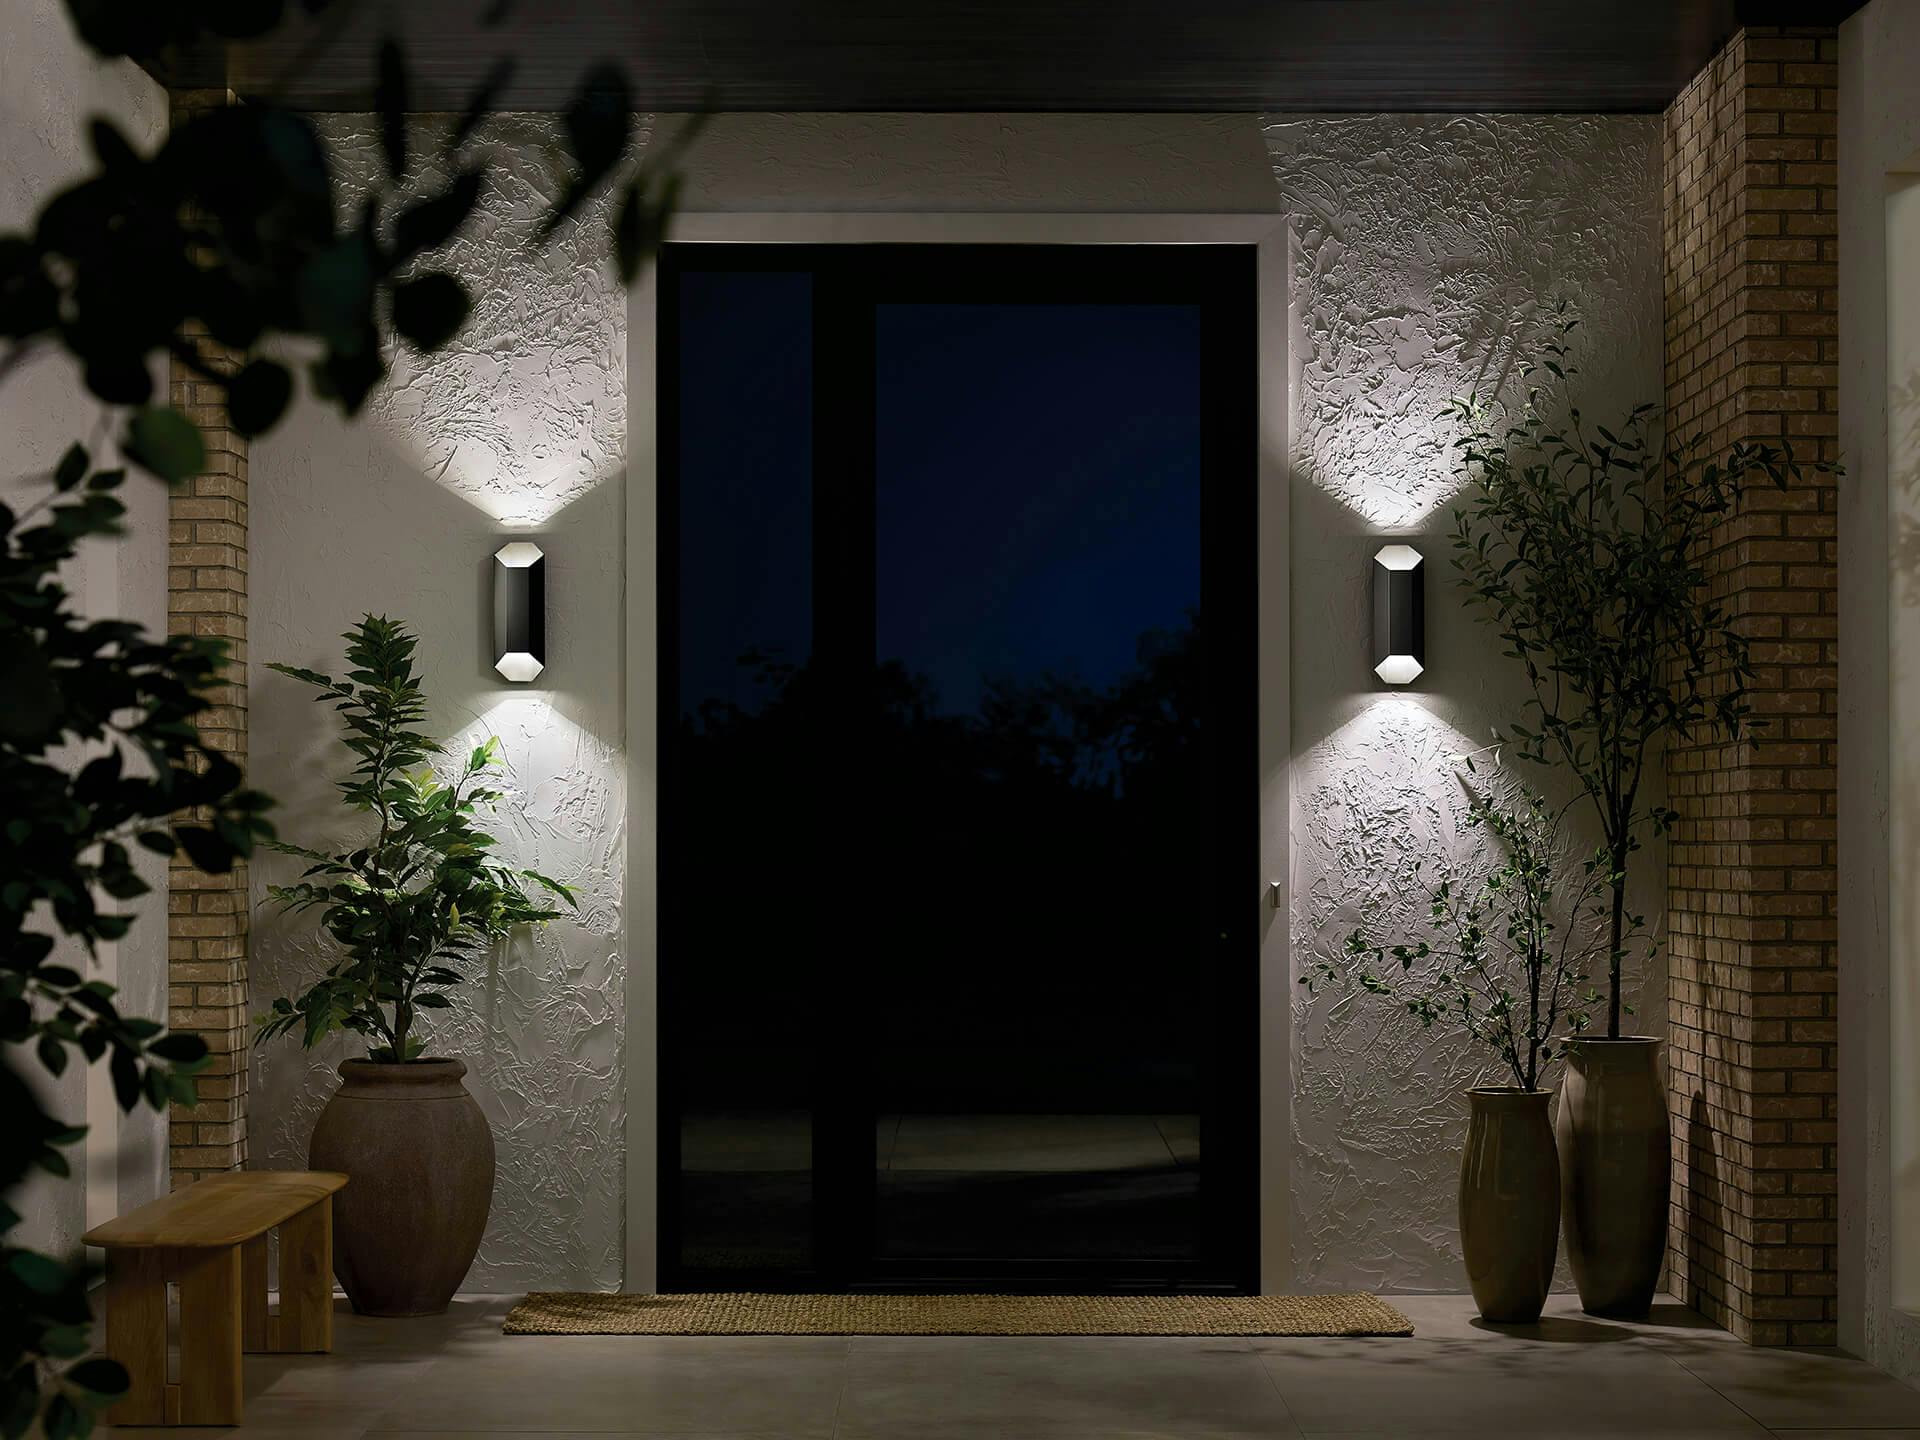 Two estella wall sconces on either side of a front door at night